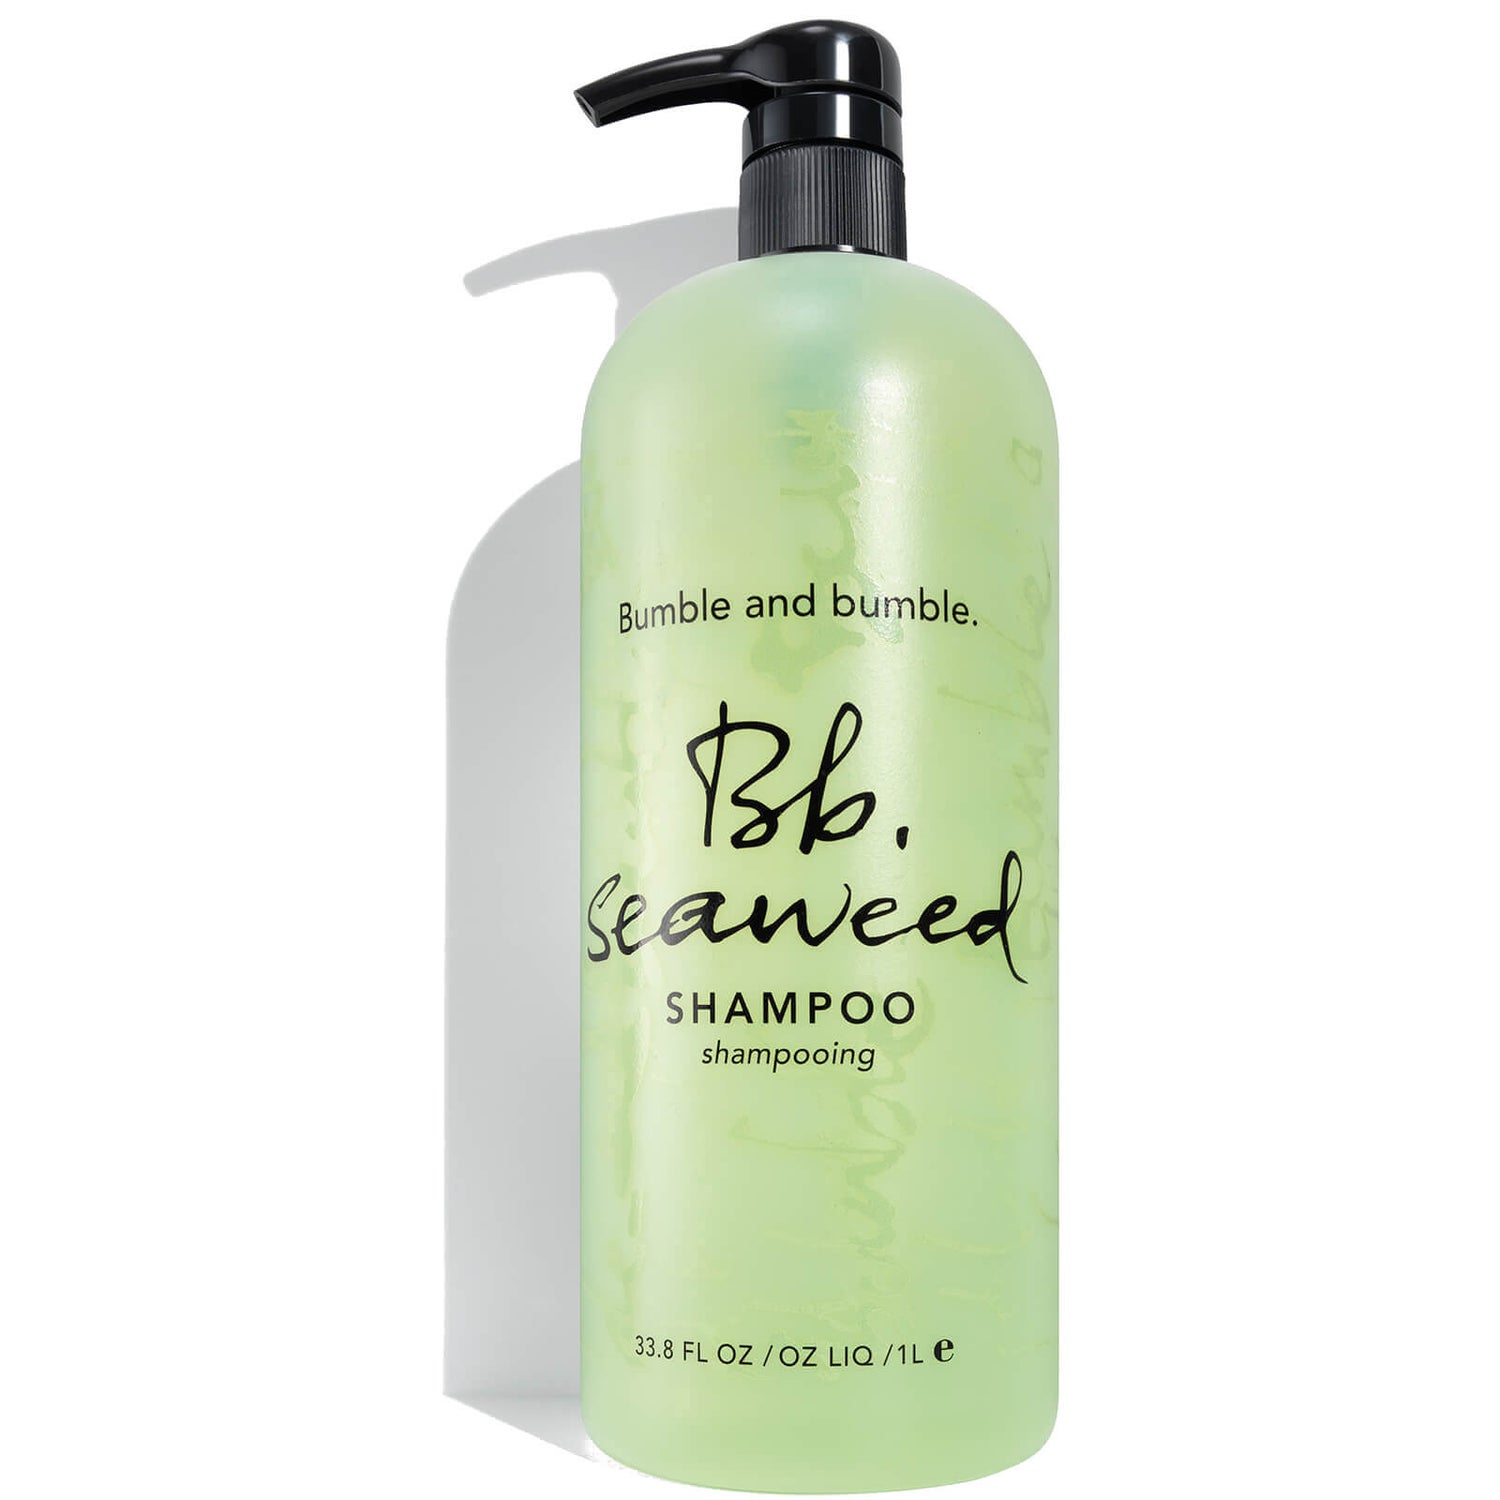 Shampoing Bumble and bumble Seaweed 1000ml